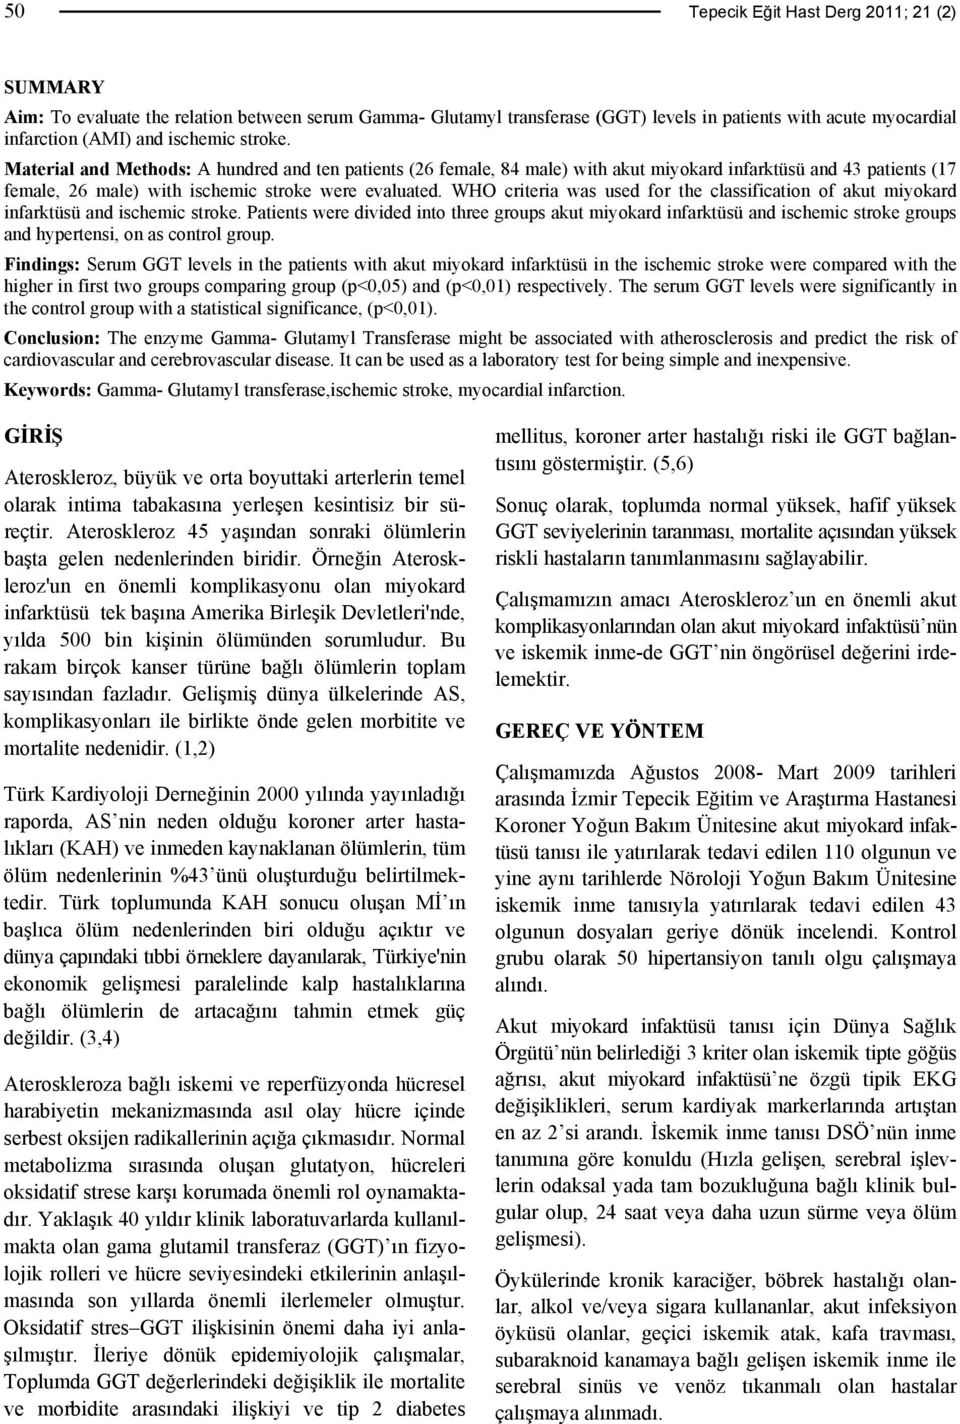 WHO criteria was used for the classification of akut miyokard infarktüsü and ischemic stroke.